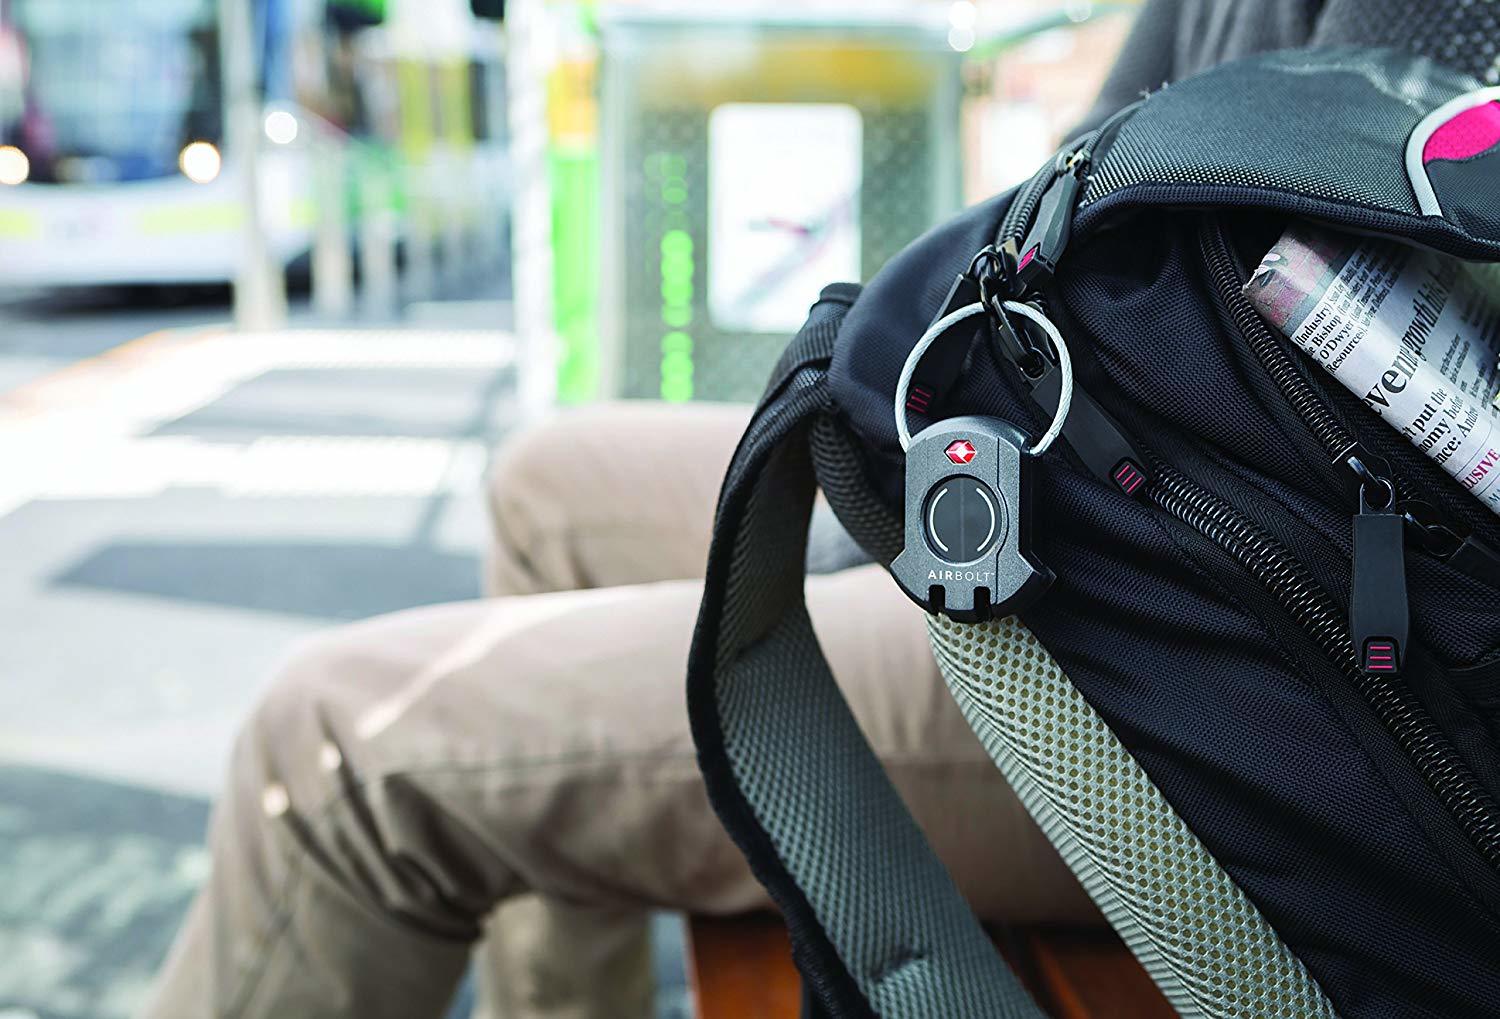 Backpacker Using The AirBolt Smart Lock